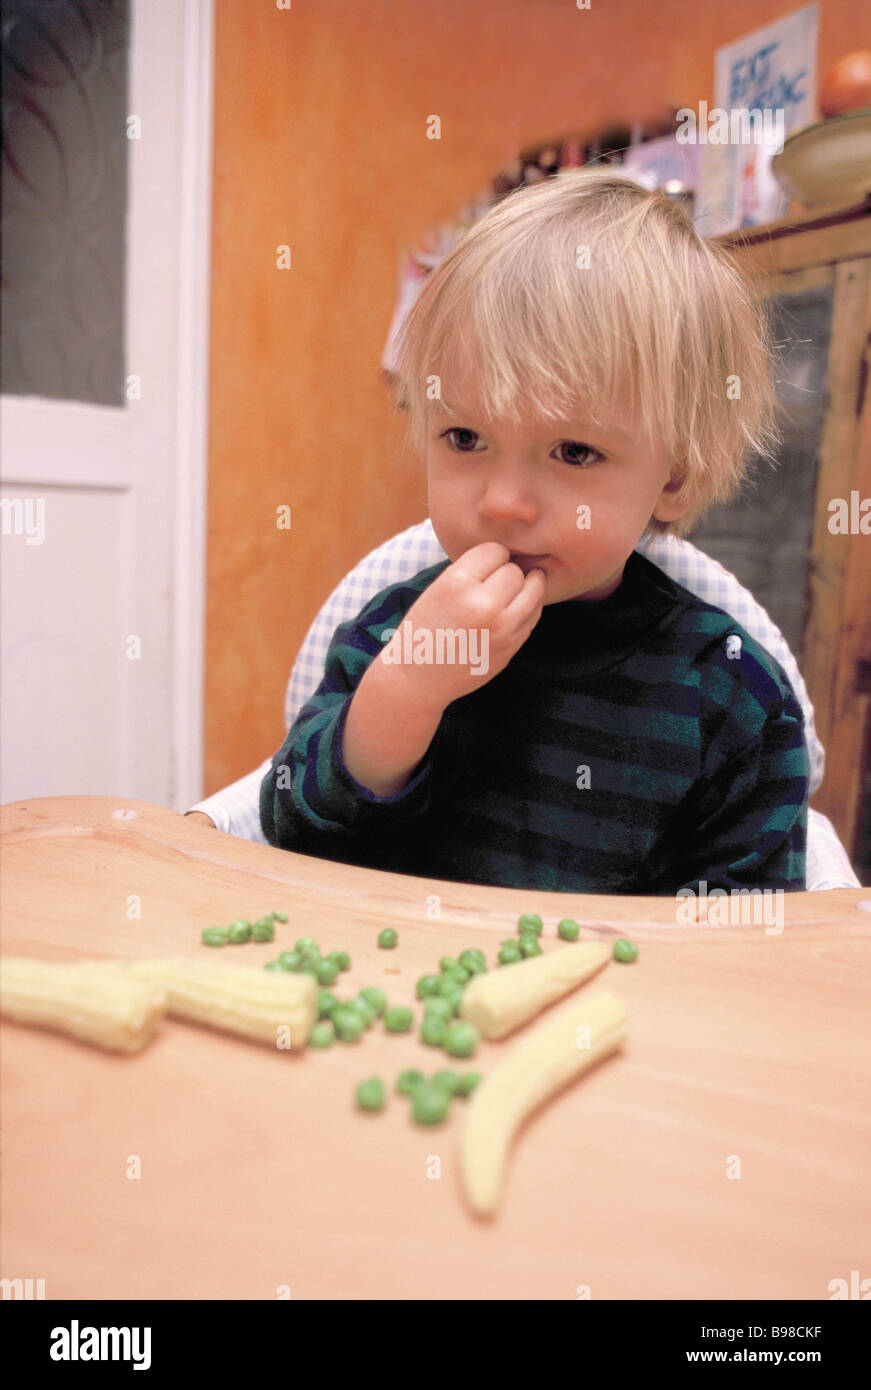 A young child upset at mealtime Stock Photo